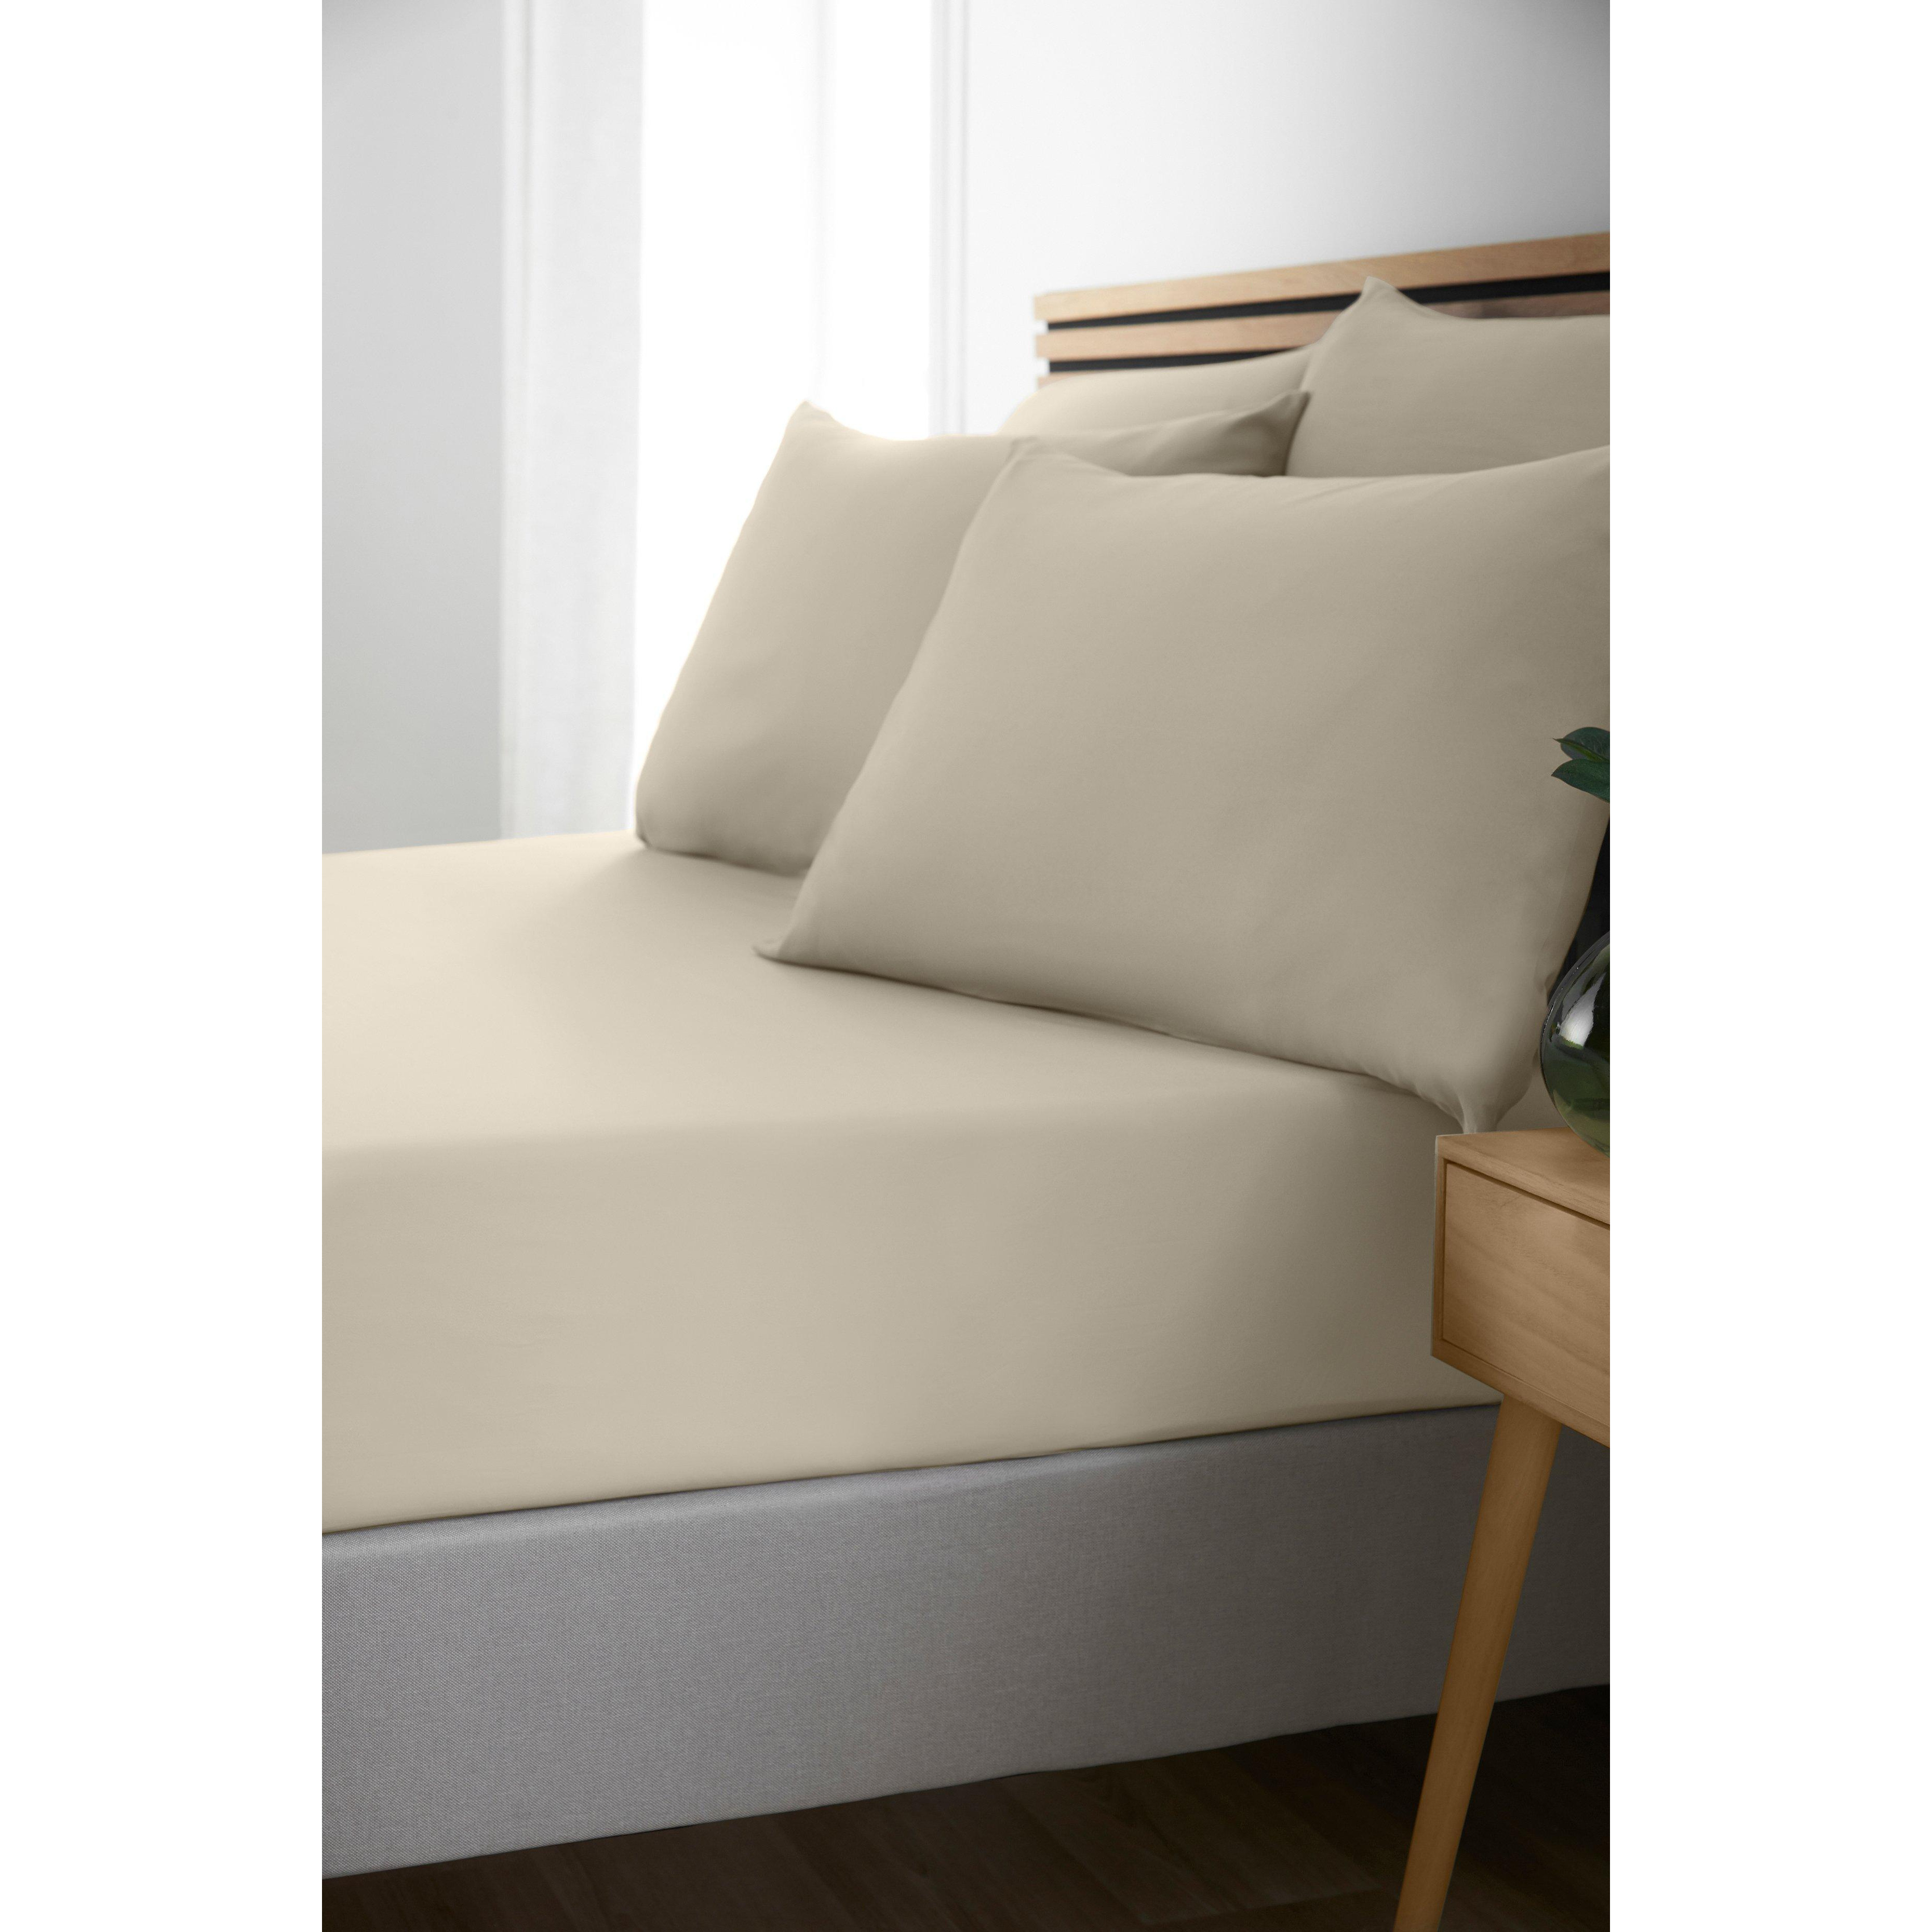 'So Soft Easy Iron' Fitted Sheet - image 1